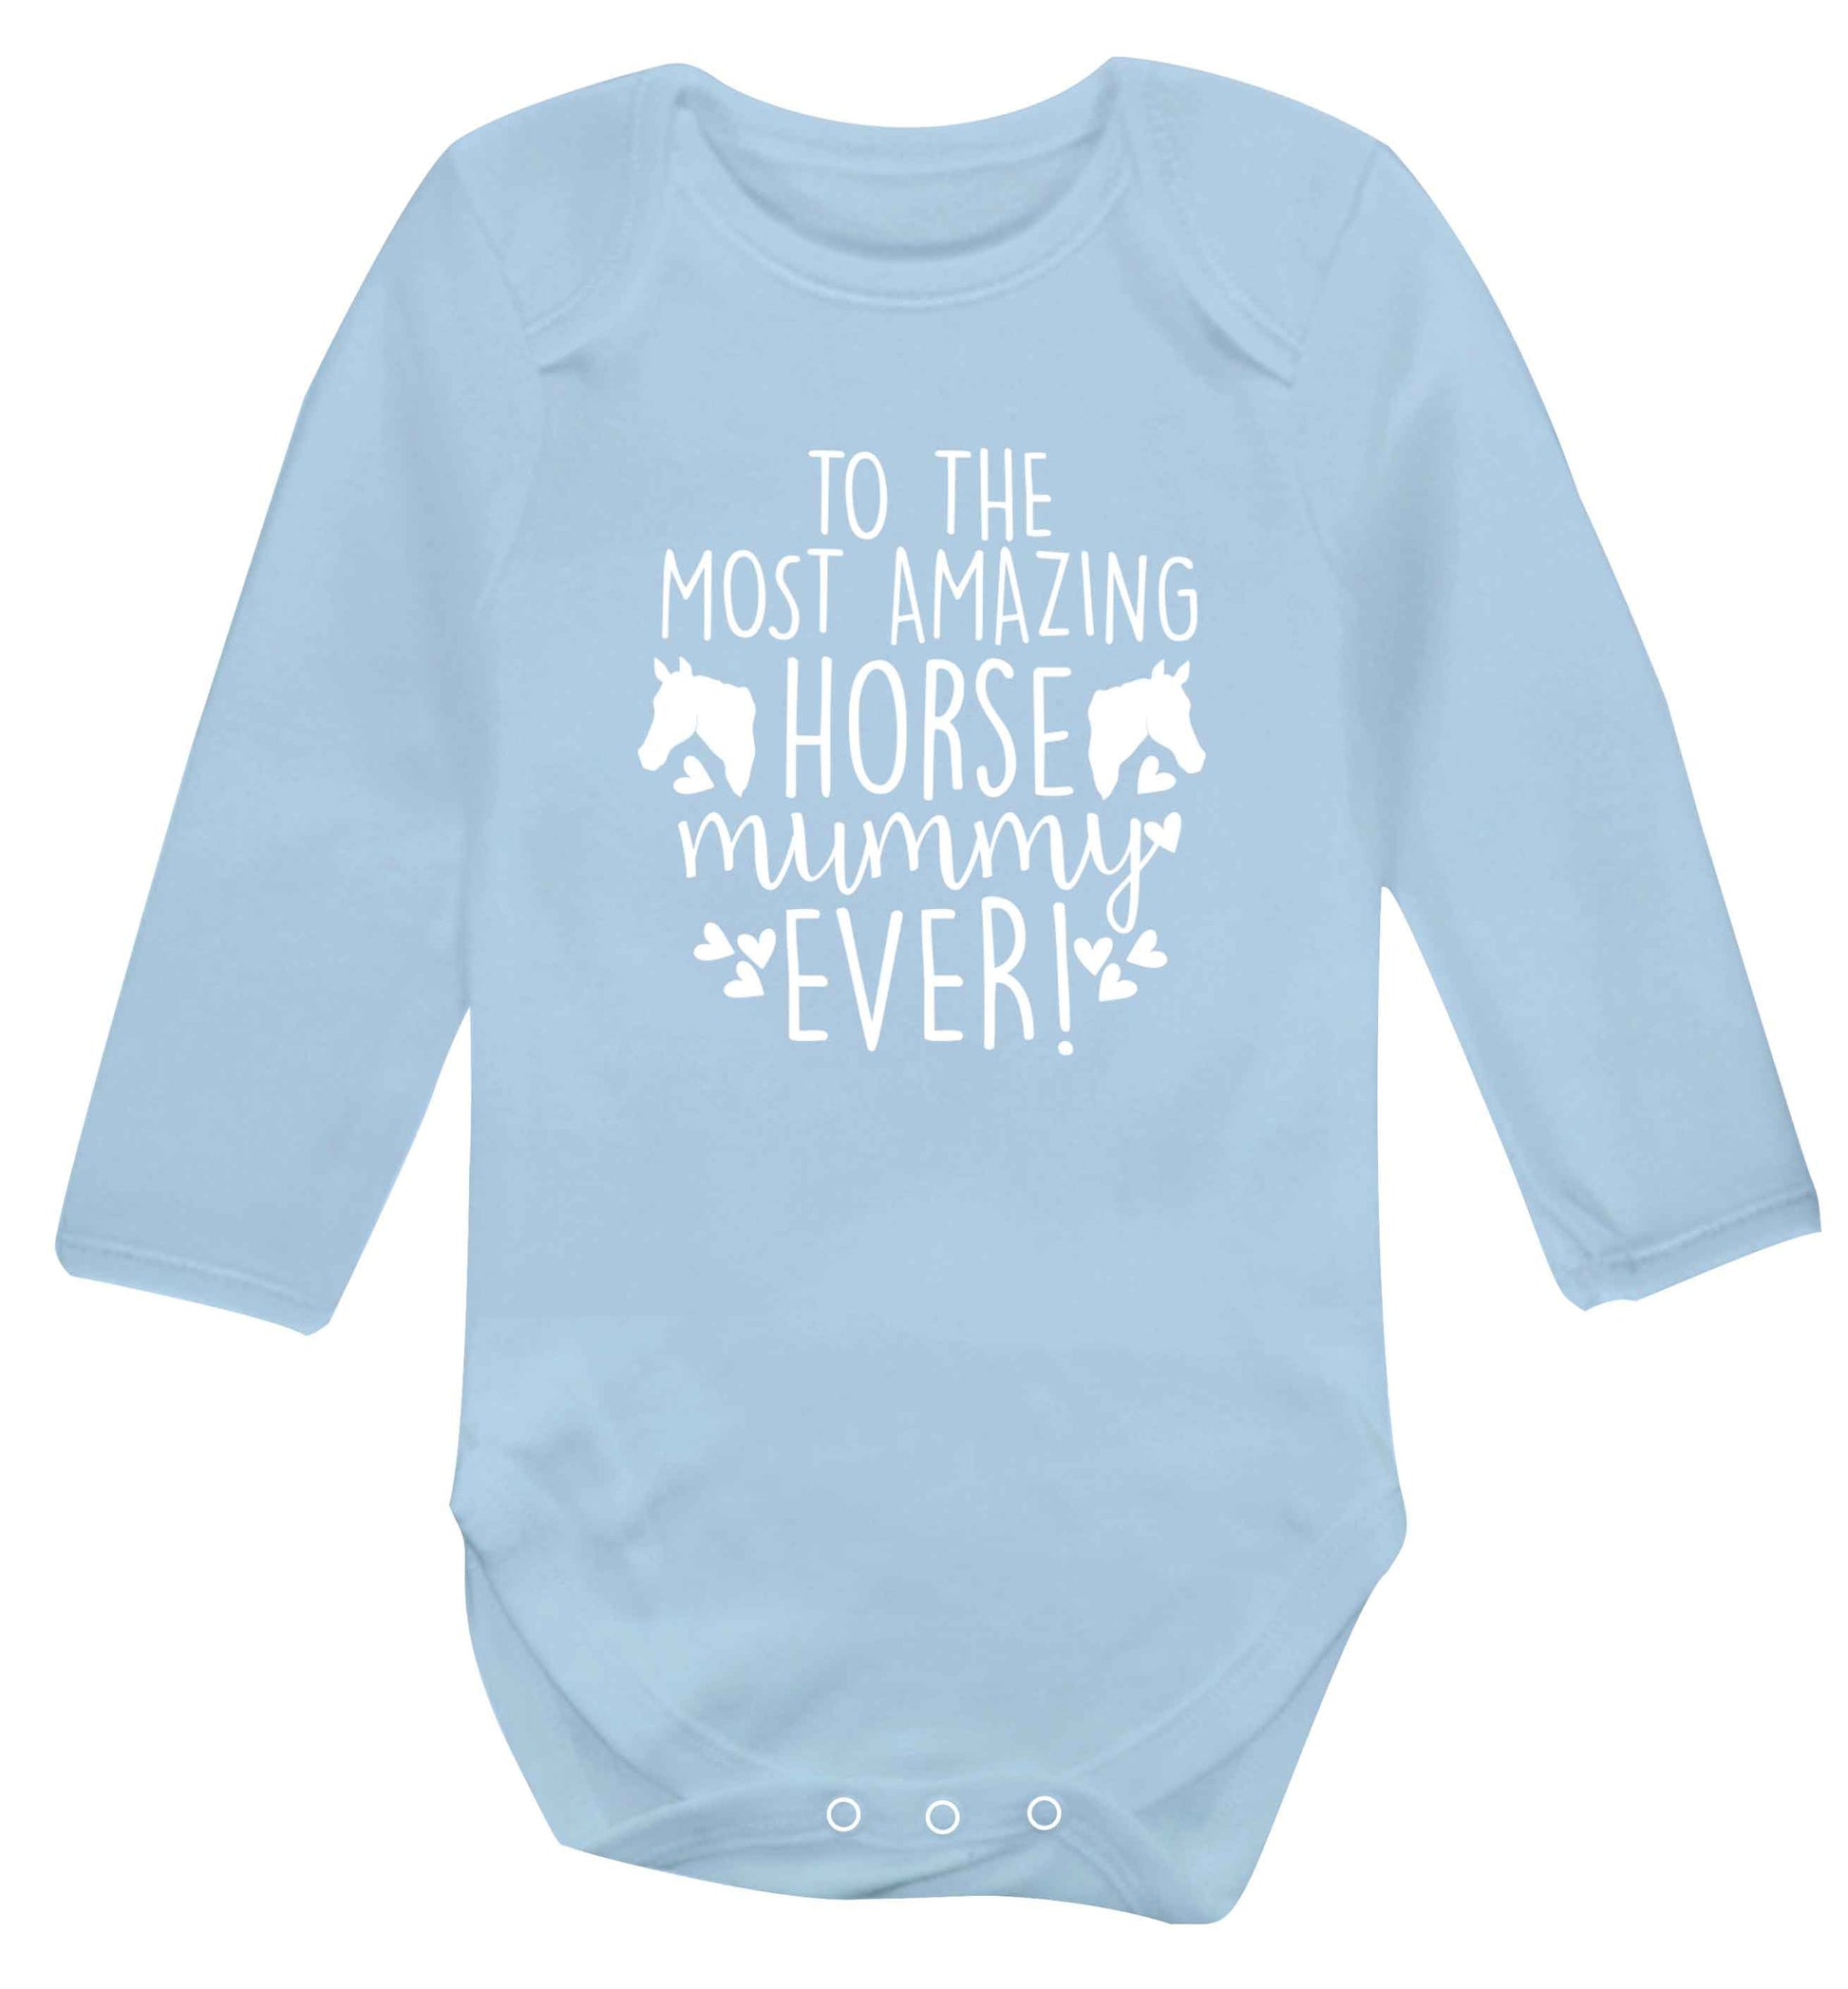 To the most amazing horse mummy ever! baby vest long sleeved pale blue 6-12 months